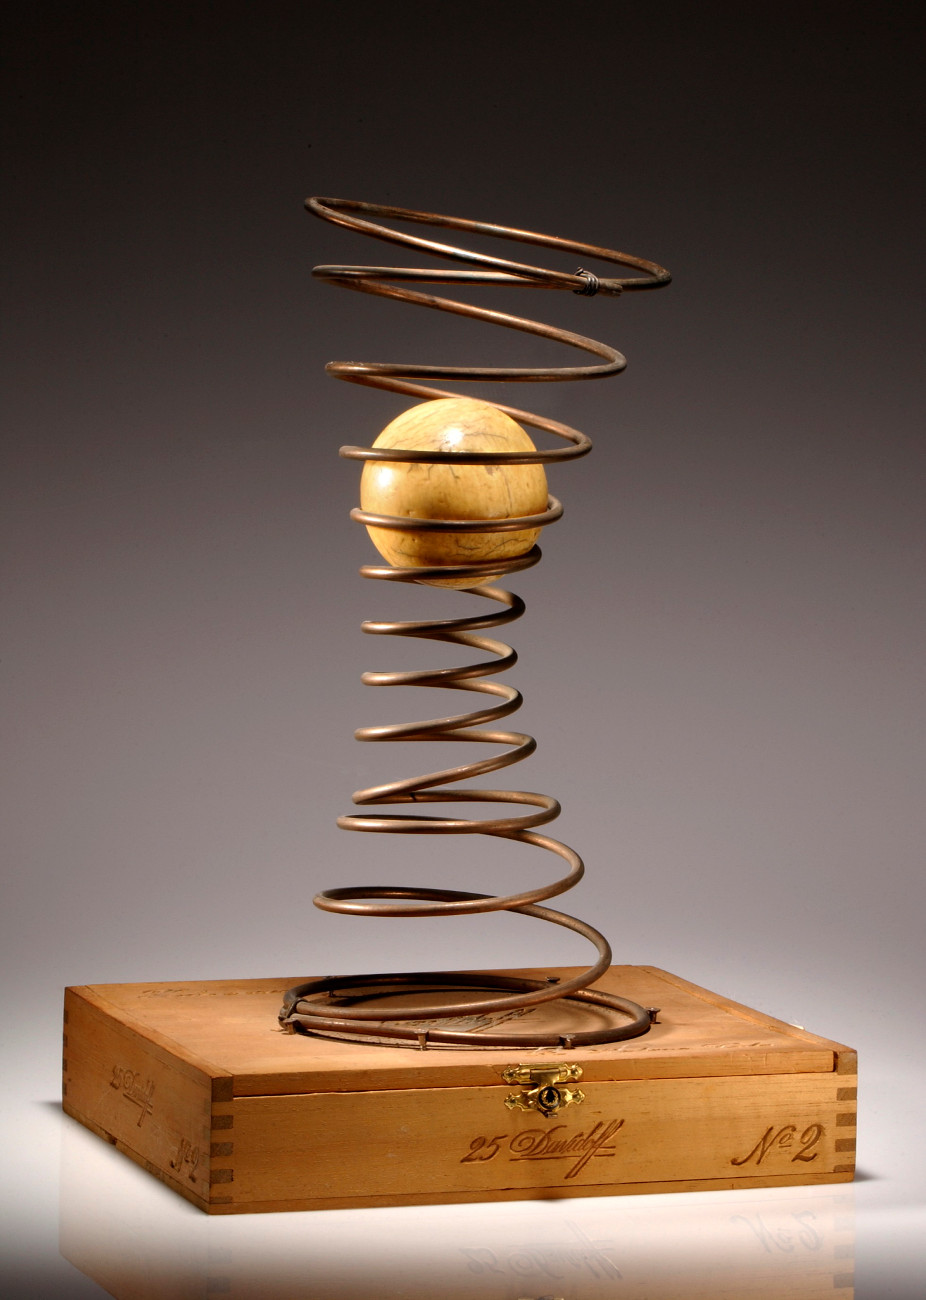 Fig. 8 – Man Ray, It’s another Spring, 1961, mixed media: metal spring, ivory ball, and wooden cigar box, 29.5 x 20.2 x 16.8 cm, Smithsonian American Art Museum, Gift of Juliet Man Ray, 1983.105.6 .